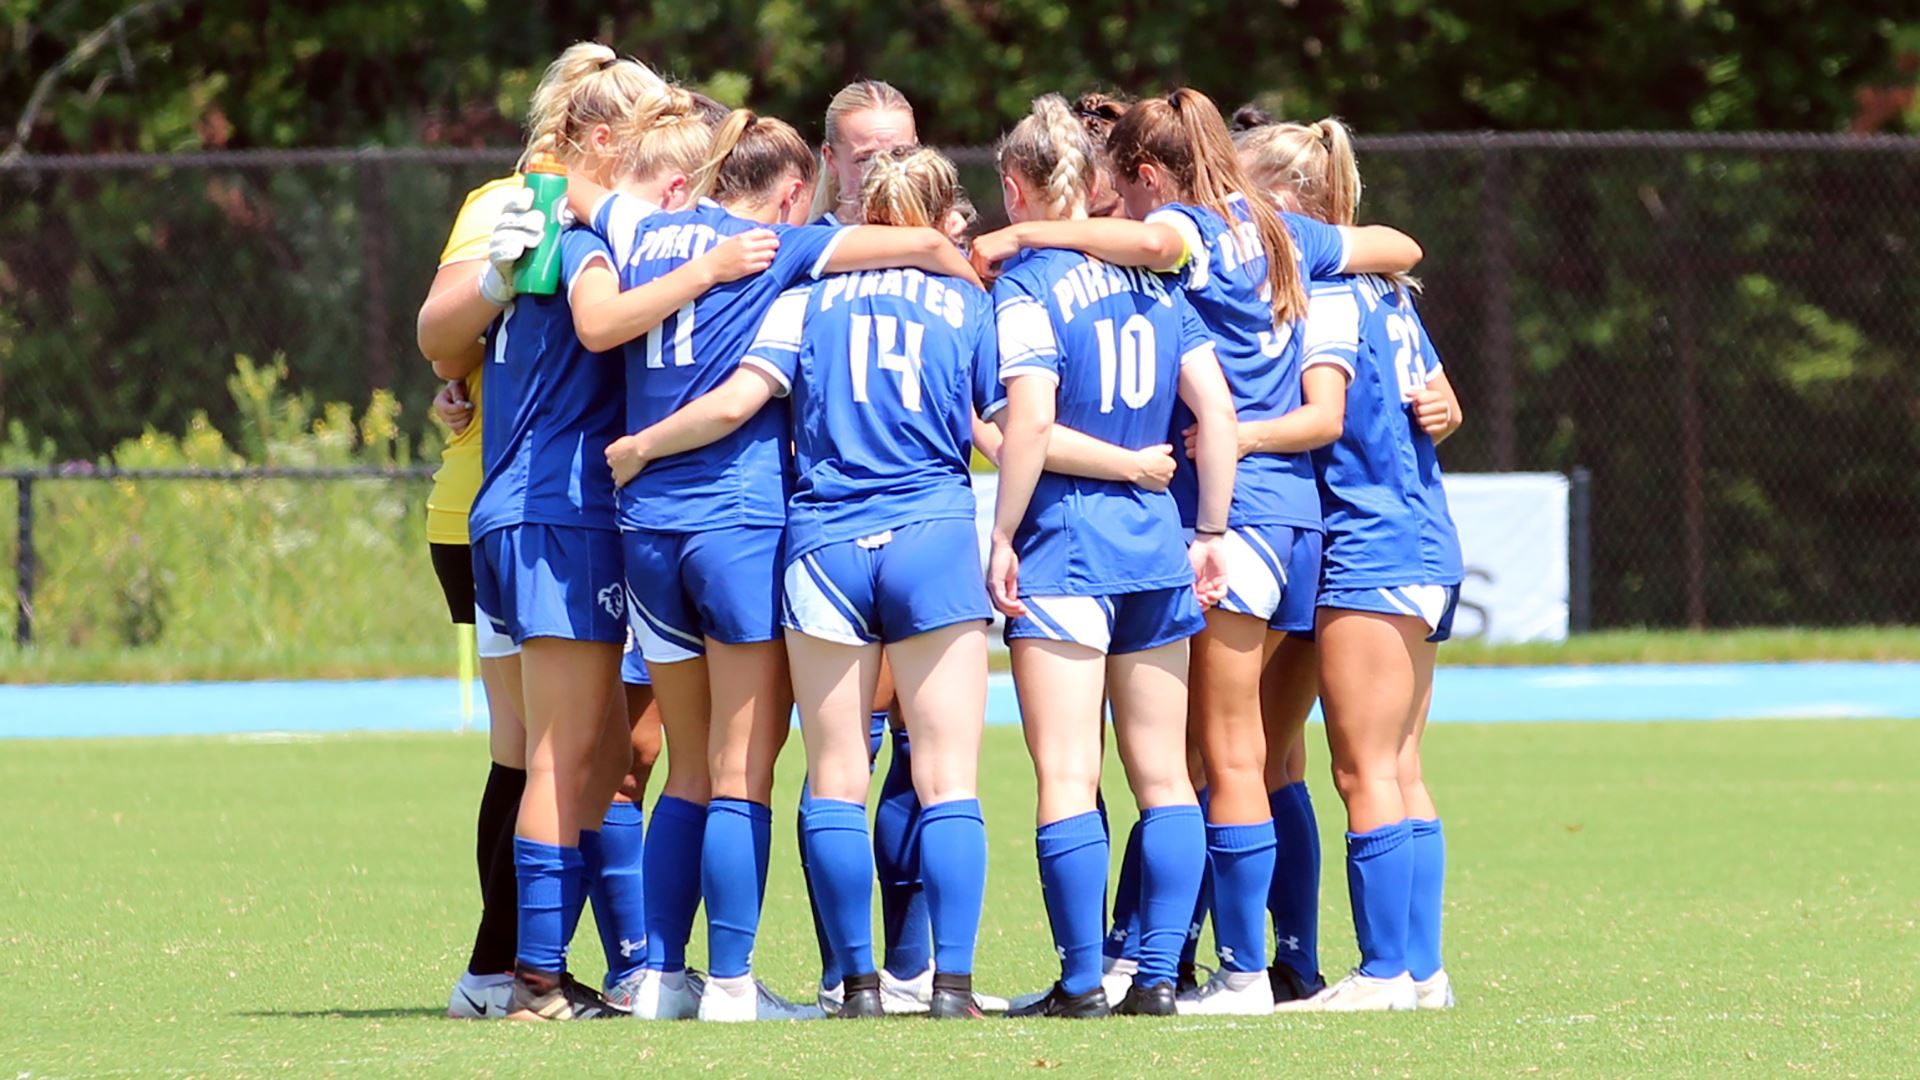 The Seton Hall women's soccer team huddles before a matchup against the Columbia Lions on the road.